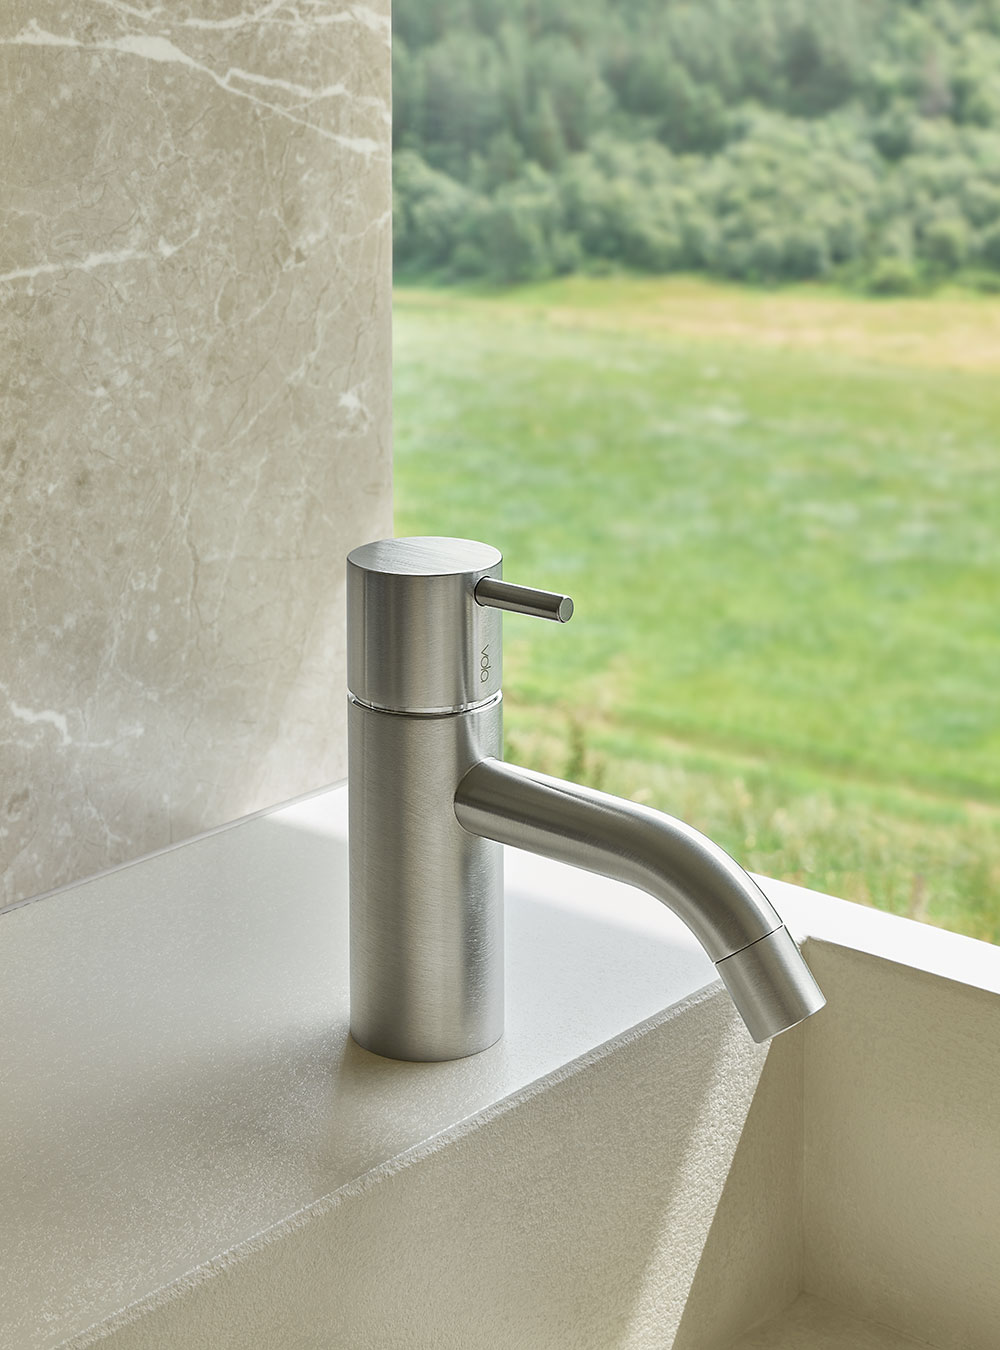 RB1: Pillar tap with ¼ turn ceramic disc technology, fixed spout with water saving aerator. Height 120...